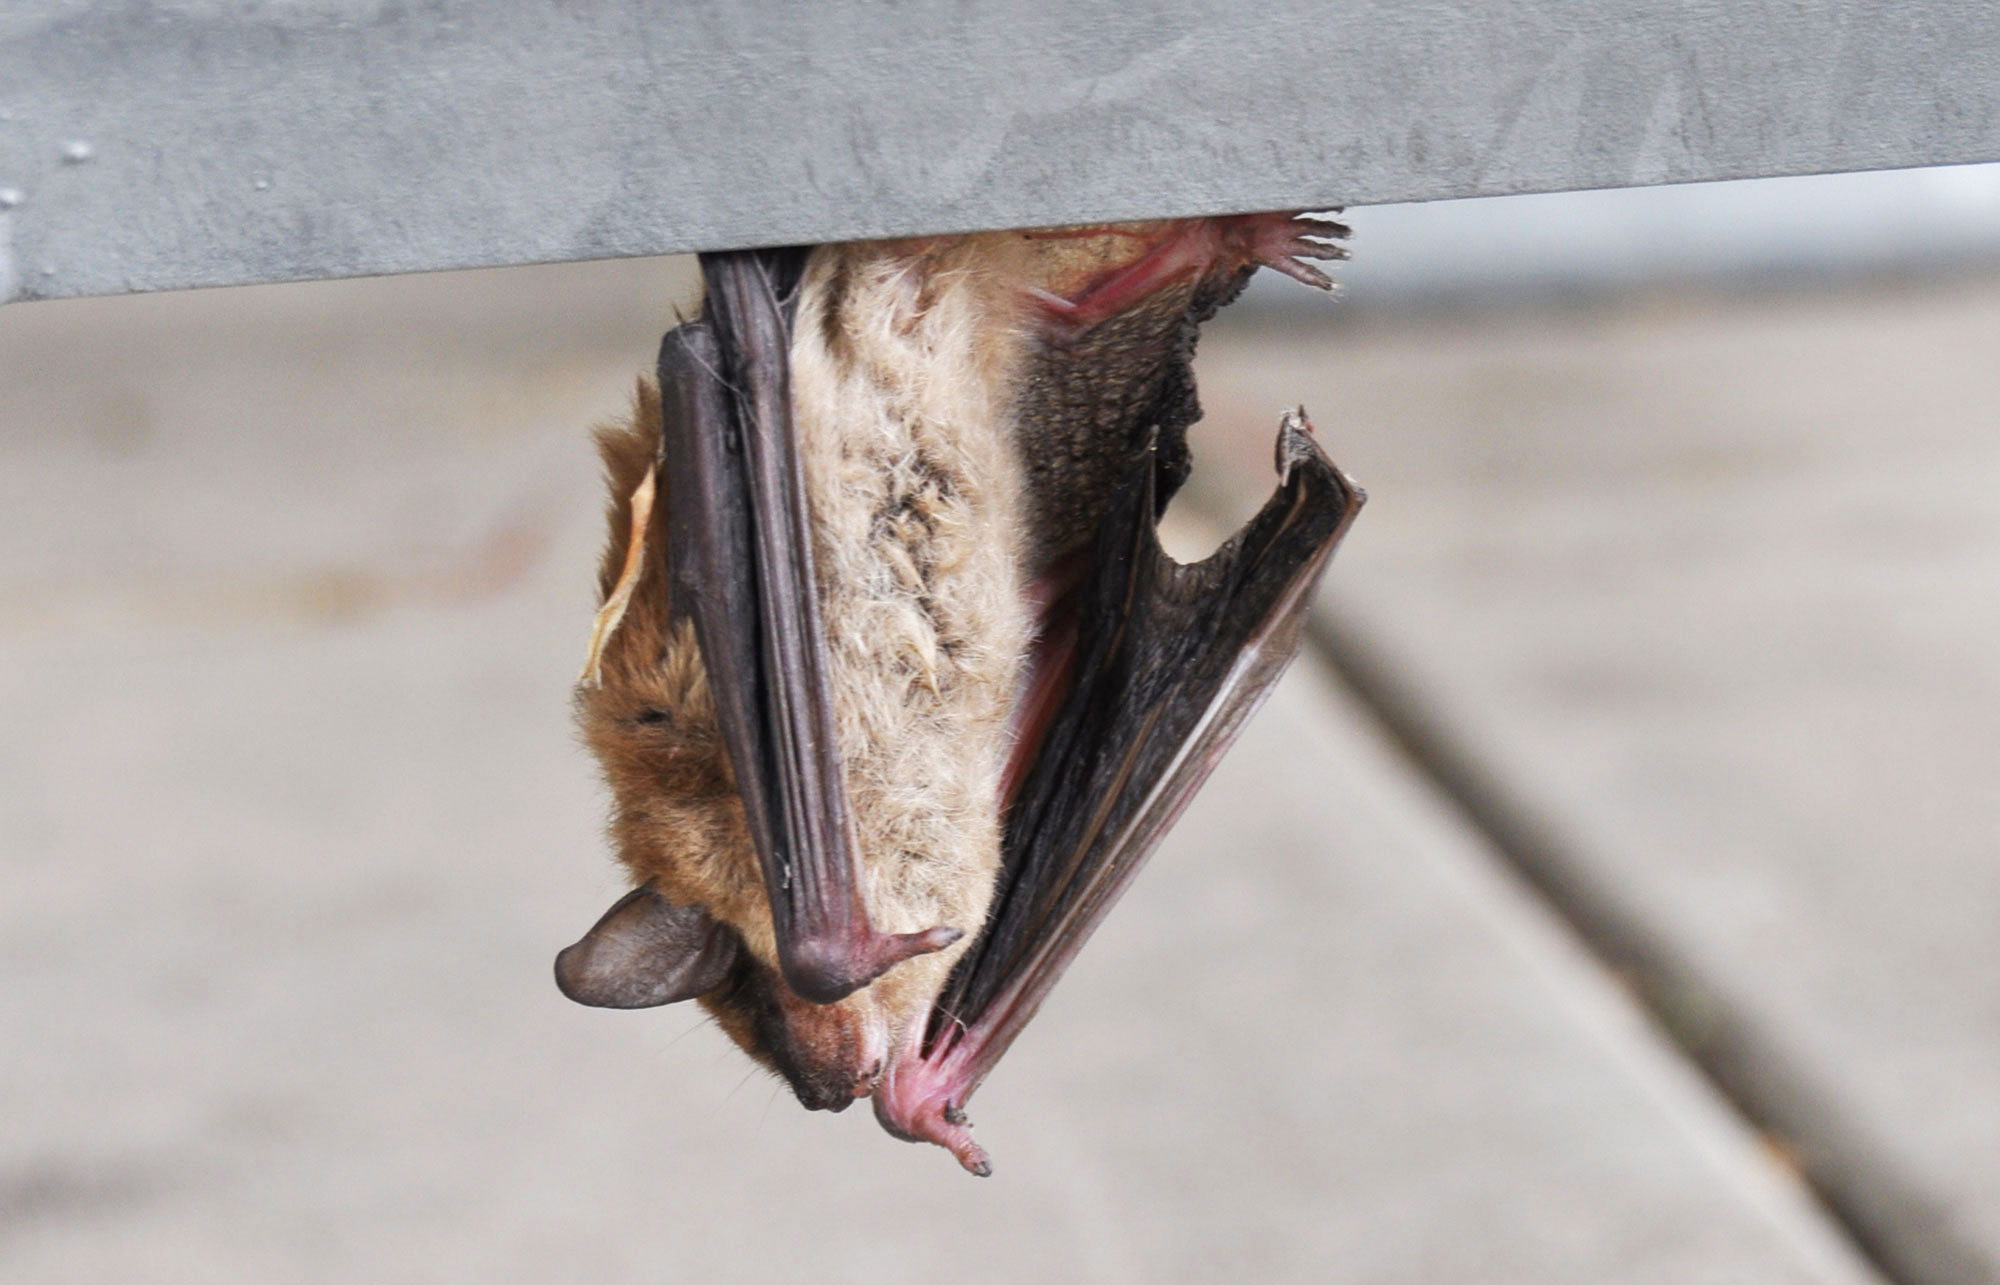 A bat hanging upside down on a picnic bench.